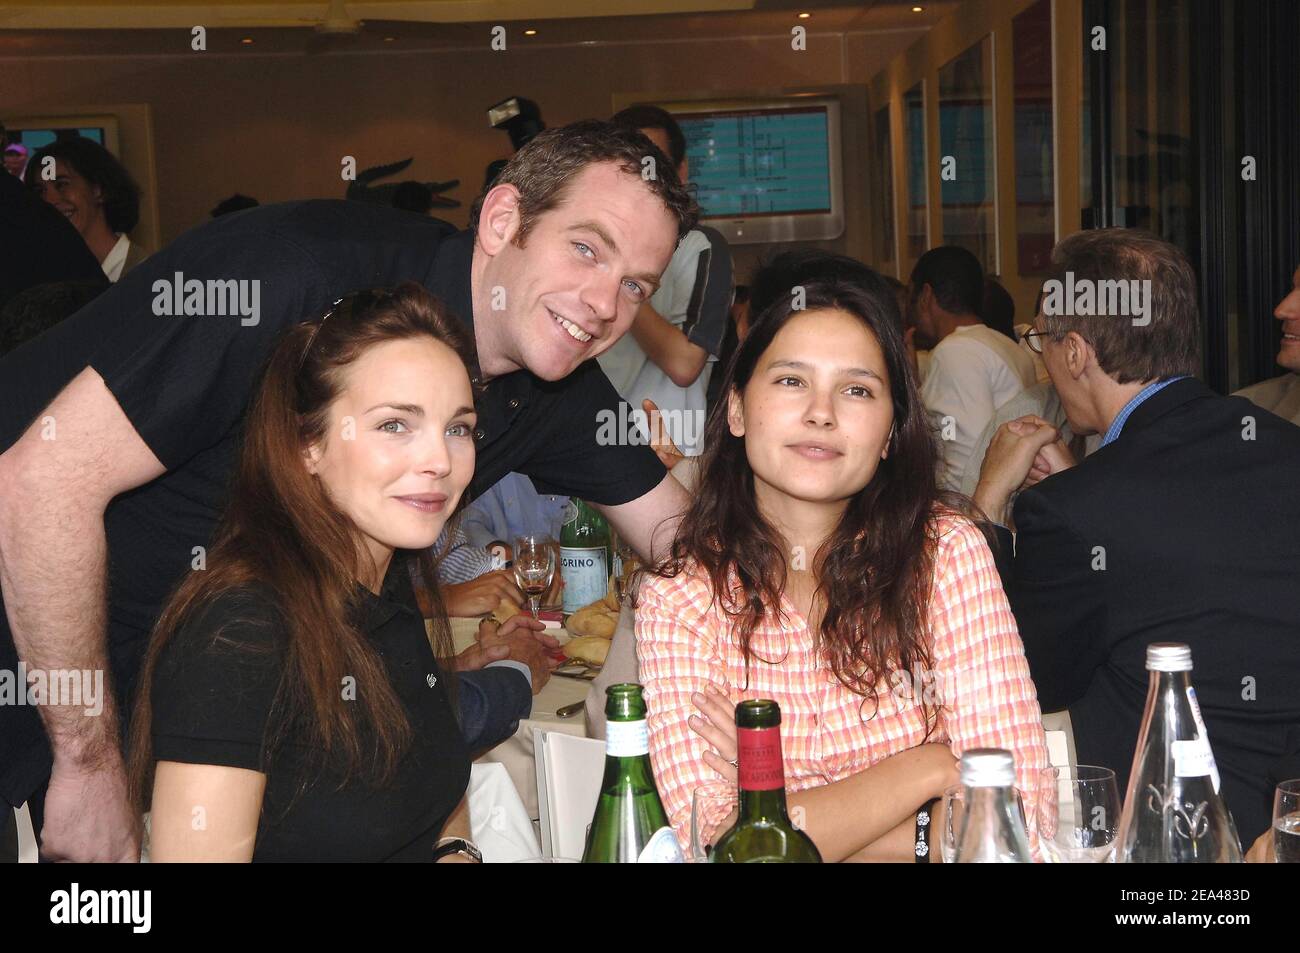 French singer Claire Keim, Canadian singer Garou and French actress Virginie Ledoyen pose while lunching at the Roland Garros 'VIP Village' during the 2005 French tennis Open at Roland Garros in Paris, France on May 31, 2005. Photo by Gorassini-Zabulon/ABACA. Stock Photo